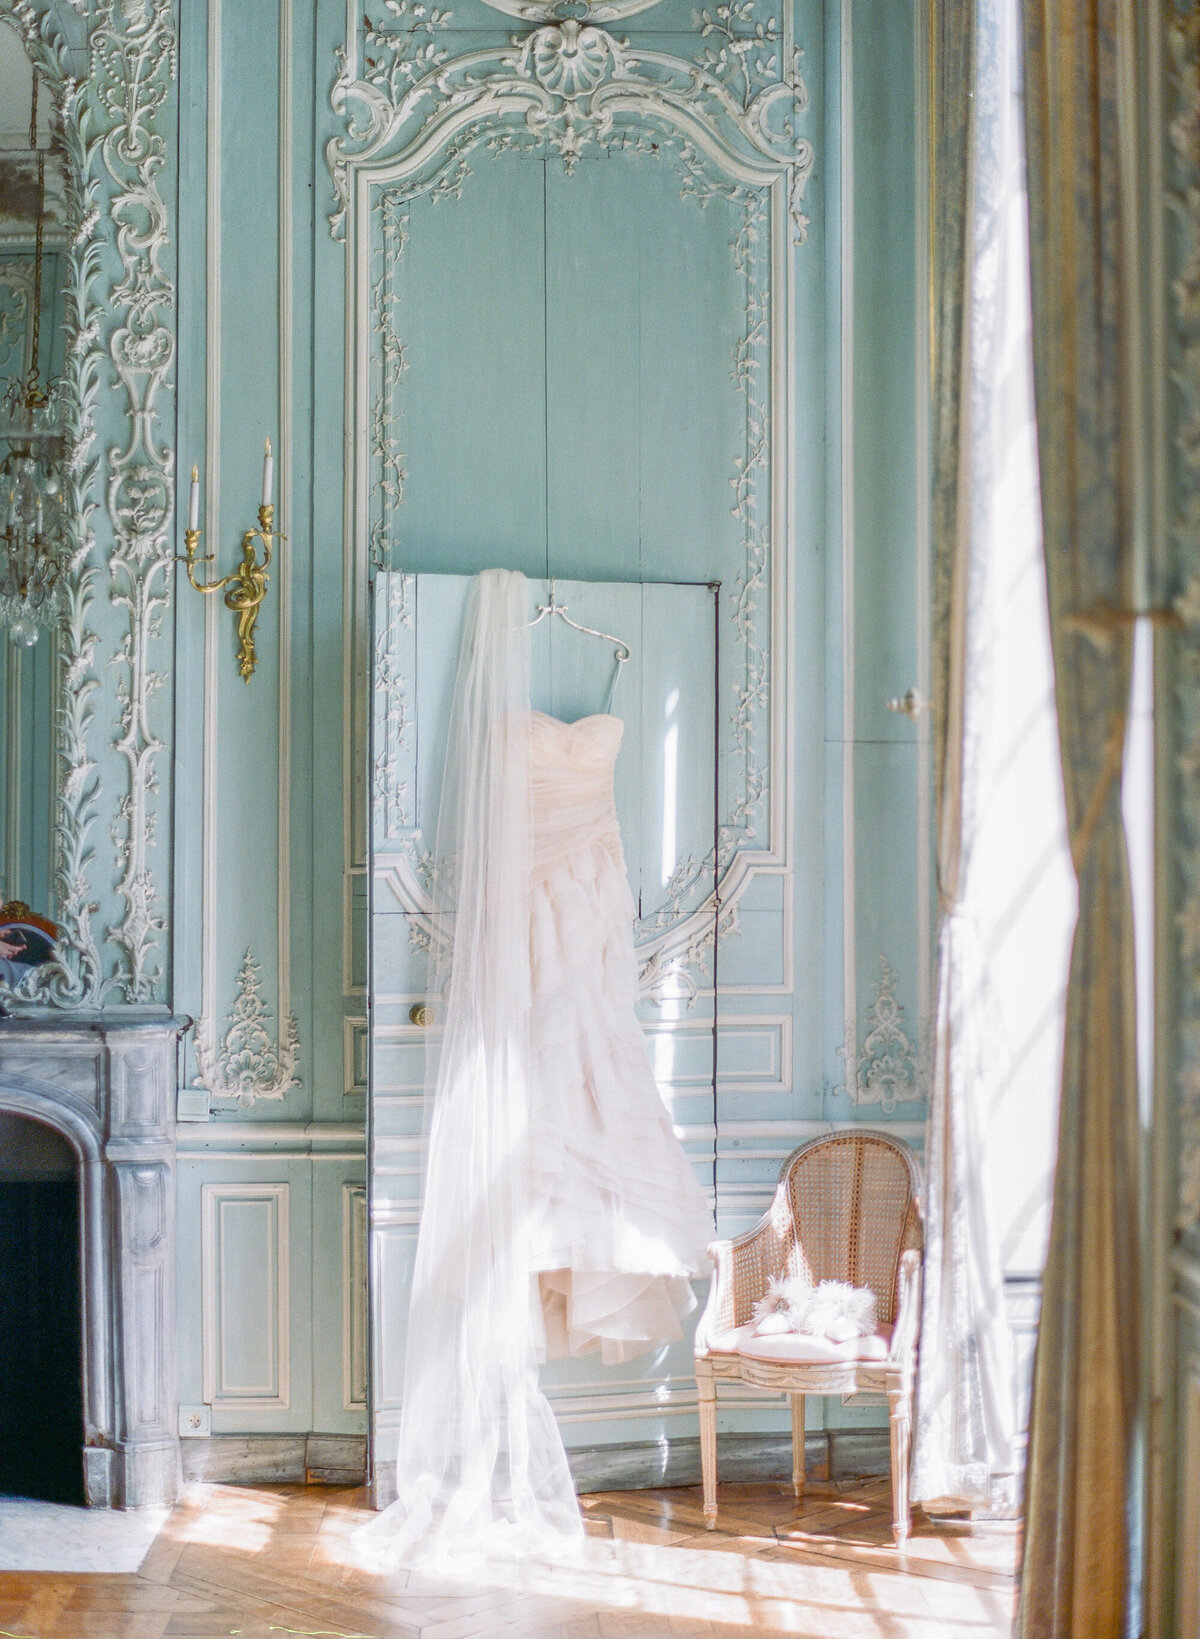 Jennifer Fox Weddings English speaking wedding planning & design agency in France crafting refined and bespoke weddings and celebrations Provence, Paris and destination Laurel-Chris-Chateau-de-Champlatreaux-Molly-Carr-Photography-31